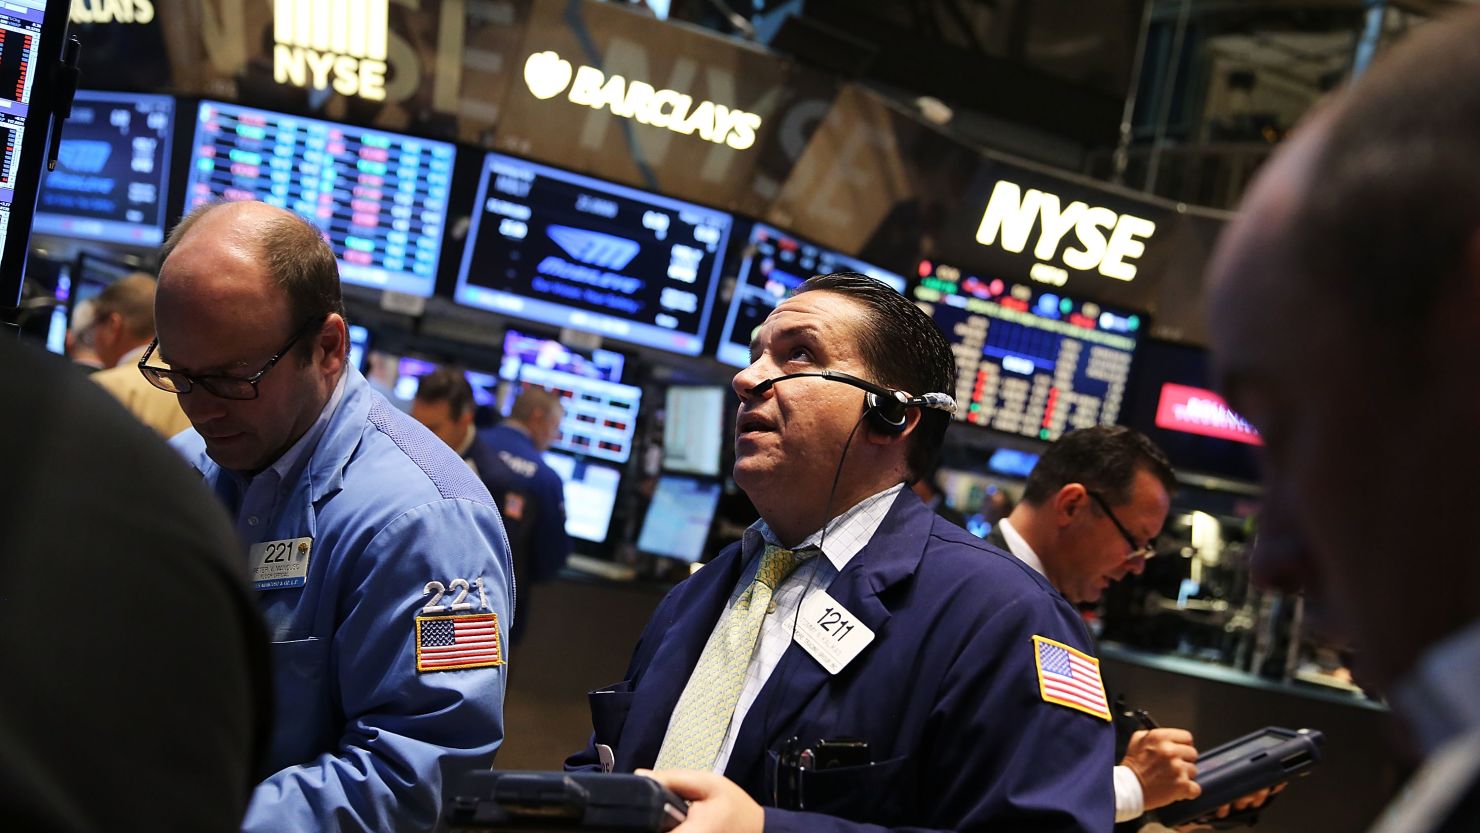 Traders work on the floor of the New York Stock Exchange (NYSE) on August 1, 2014 in New York City.